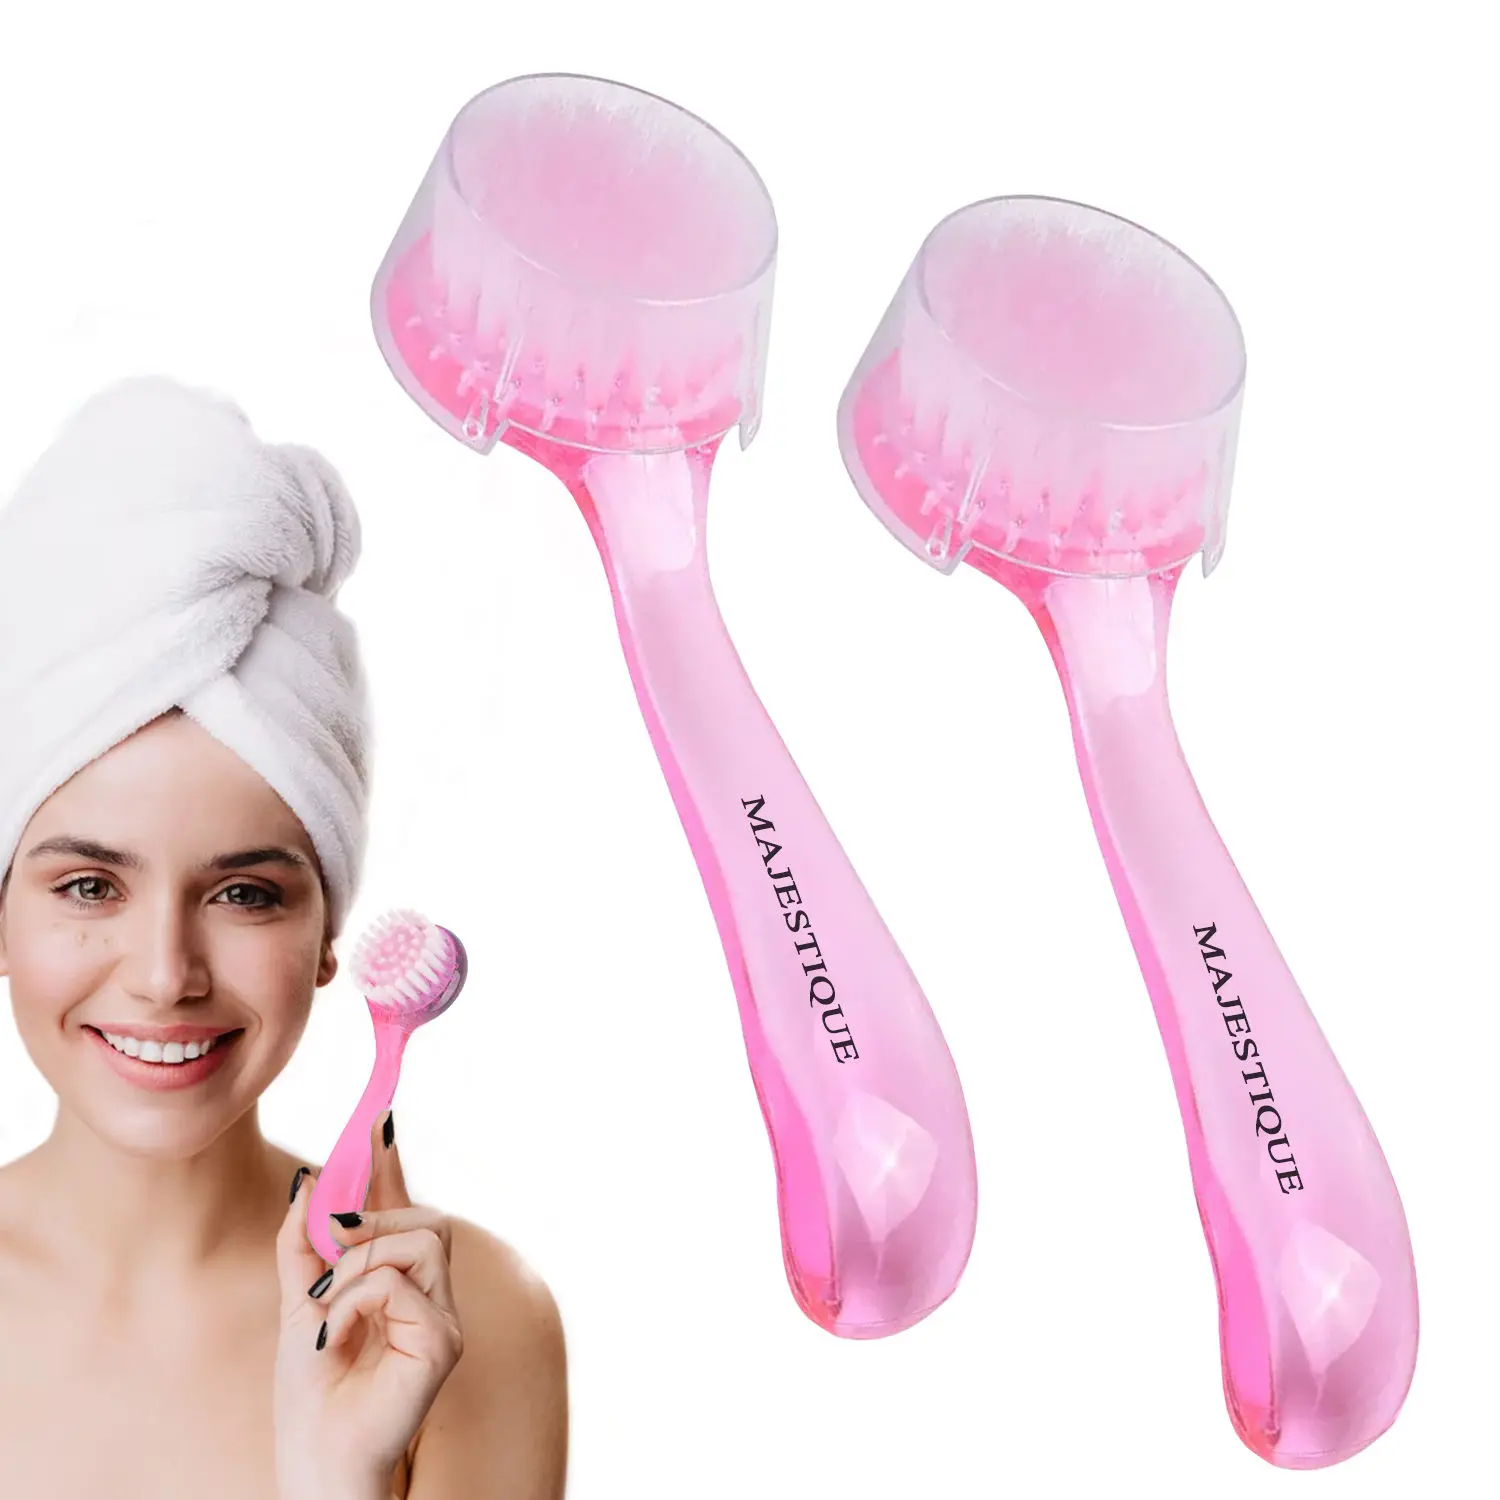 Majestique 2Pcs Facial Cleansing Brush Face Wash Brush for Women, Men - Color May Vary